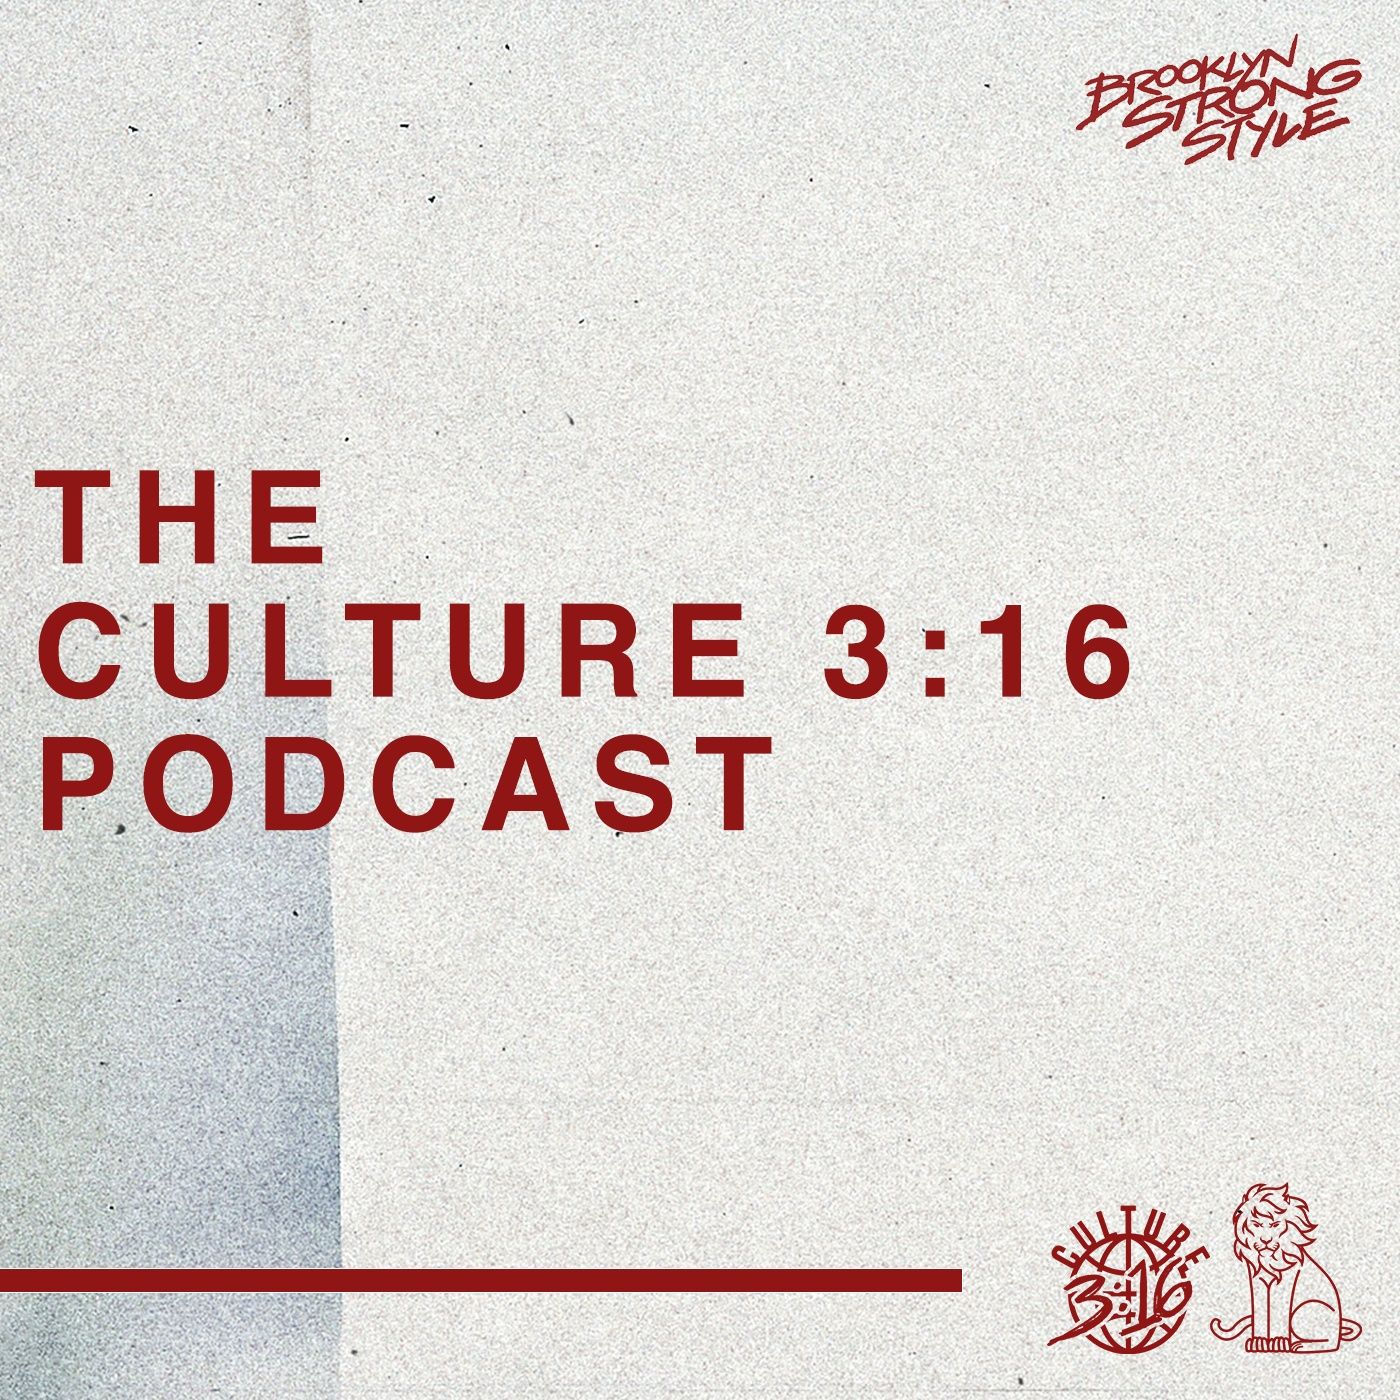 The Culture 3:16 Podcast